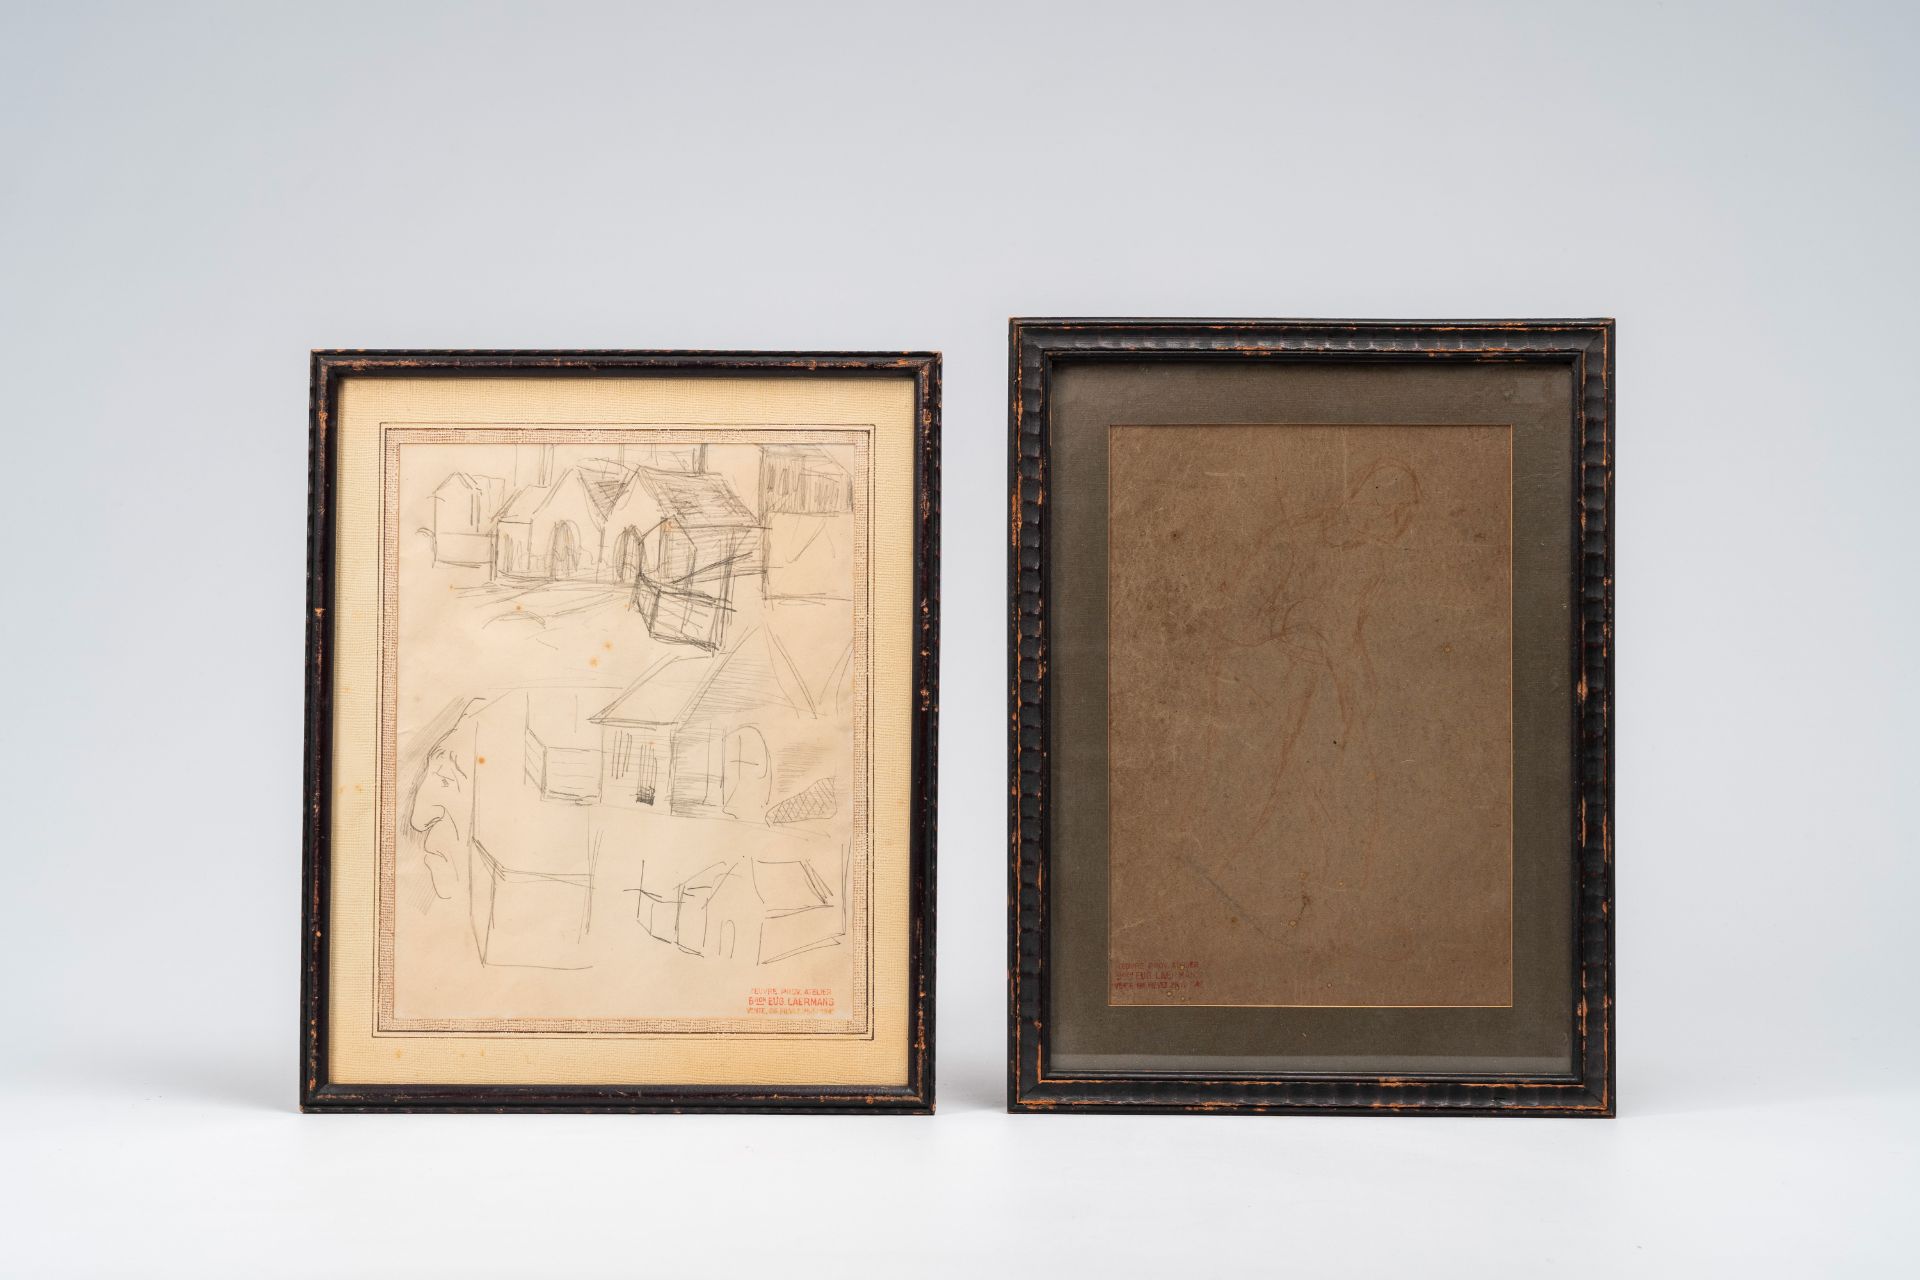 EugÃ¨ne Laermans (1864-1940): Various academic studies and sketches, pencil and charcoal on paper - Image 13 of 14